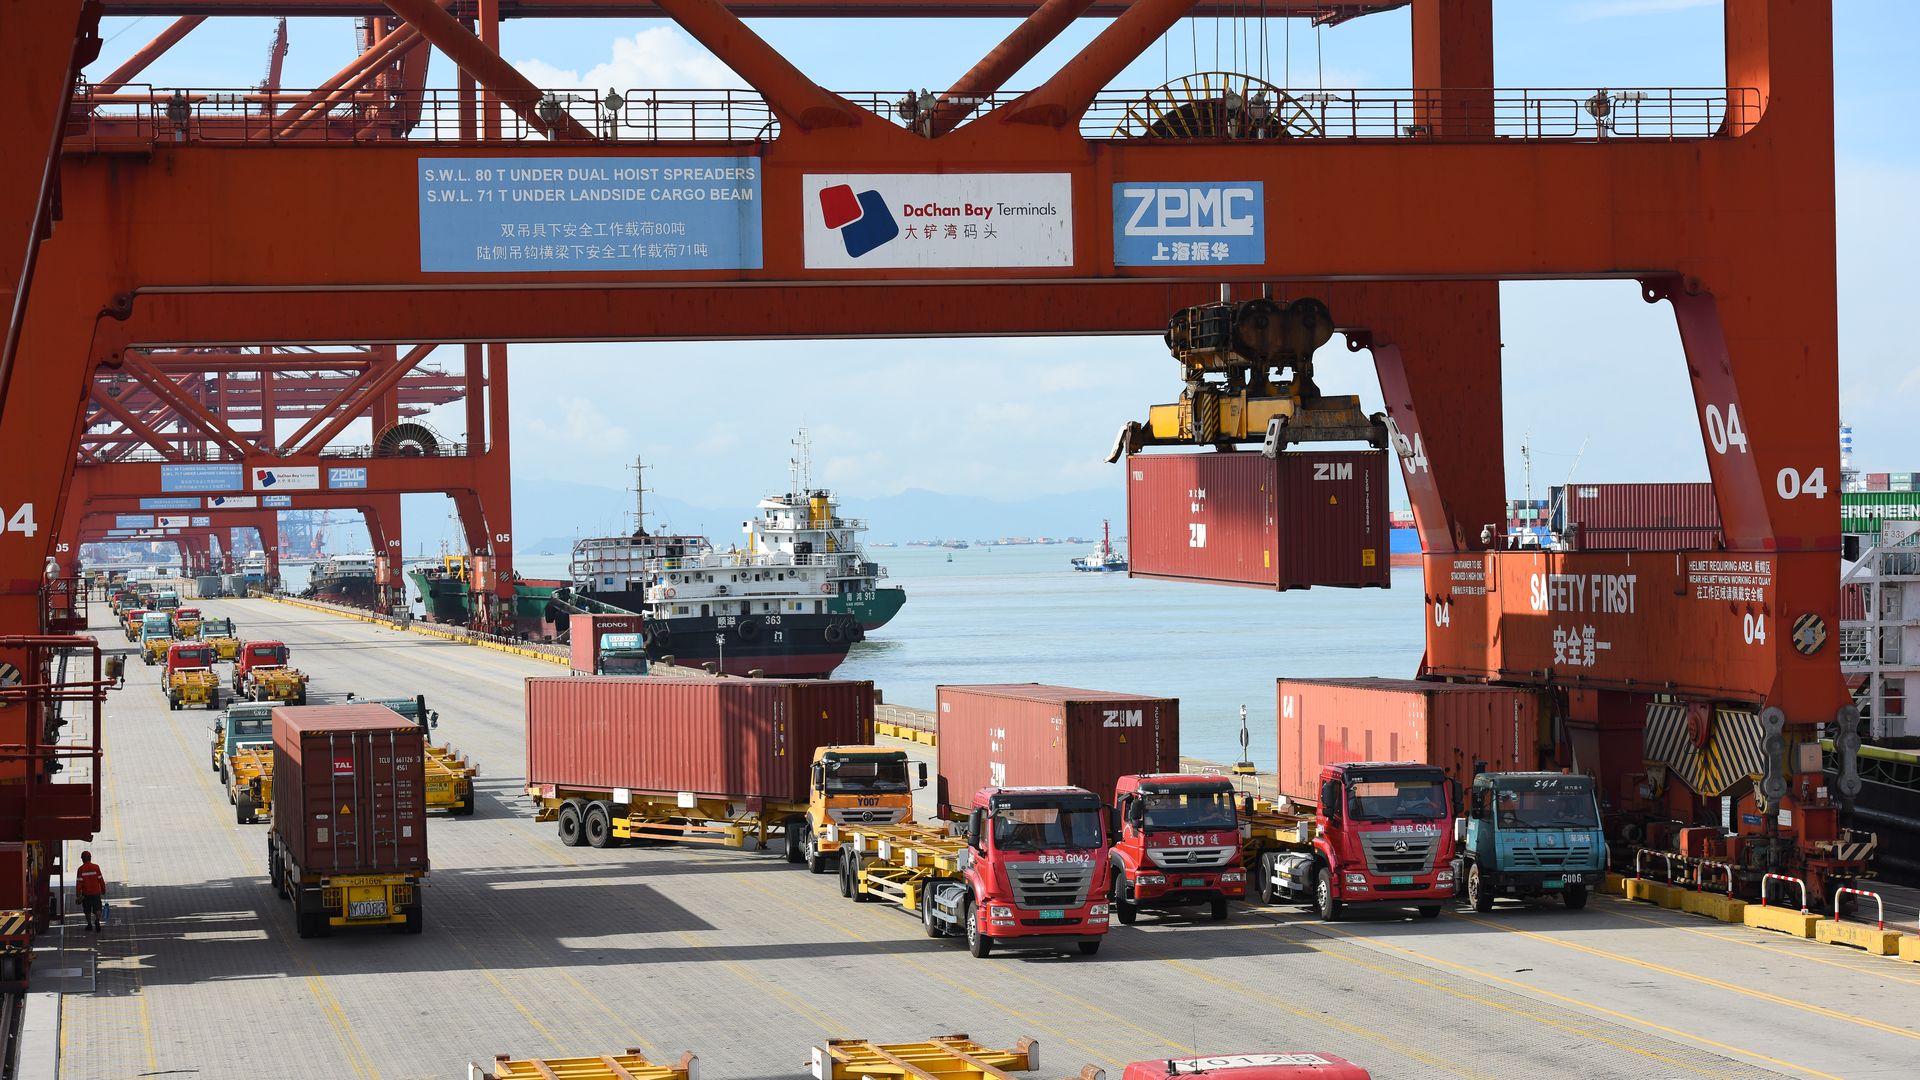 Trucks transport containers at Dachan Bay Terminals in Shenzhen, Guangdong Province of China. Photo: VCG